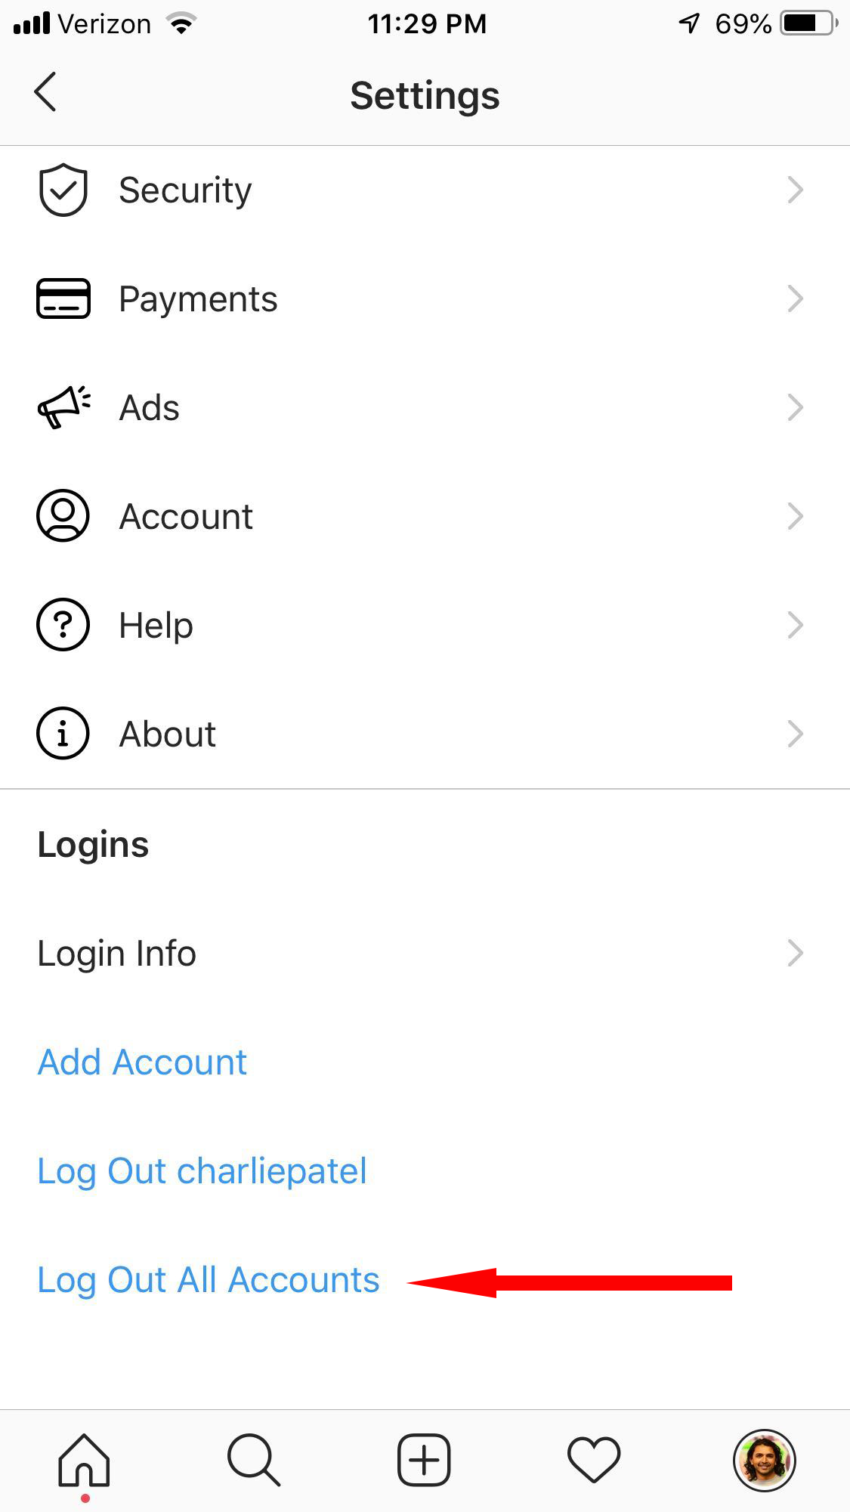 Unlink Account - Log Out All Accounts